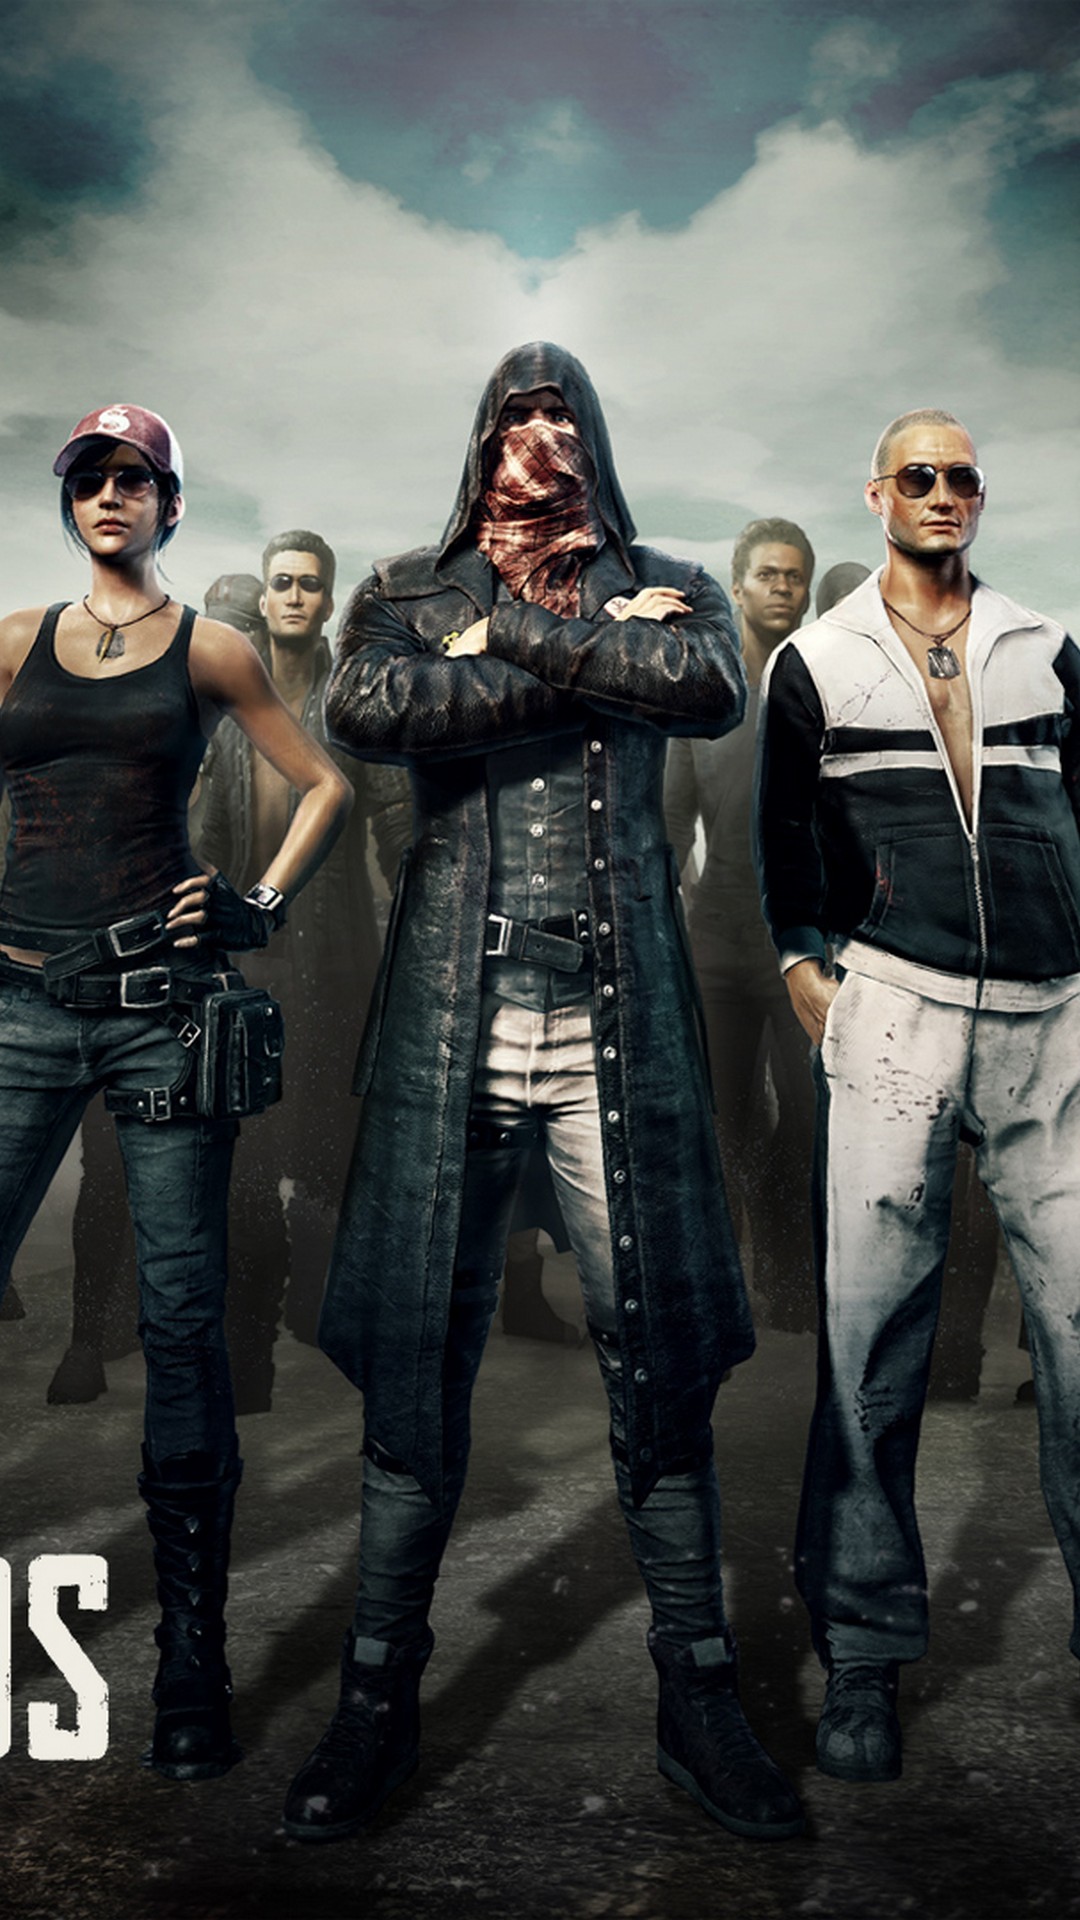 Free Download Wallpaper Pubg Mobile Iphone 2019 3d Iphone Wallpaper 1080x1920 For Your Desktop Mobile Tablet Explore 27 Pubg Season 7 Wallpapers Pubg Season 7 Wallpapers Homeland Season 7 Wallpapers Fortnite Season 7 Wallpapers